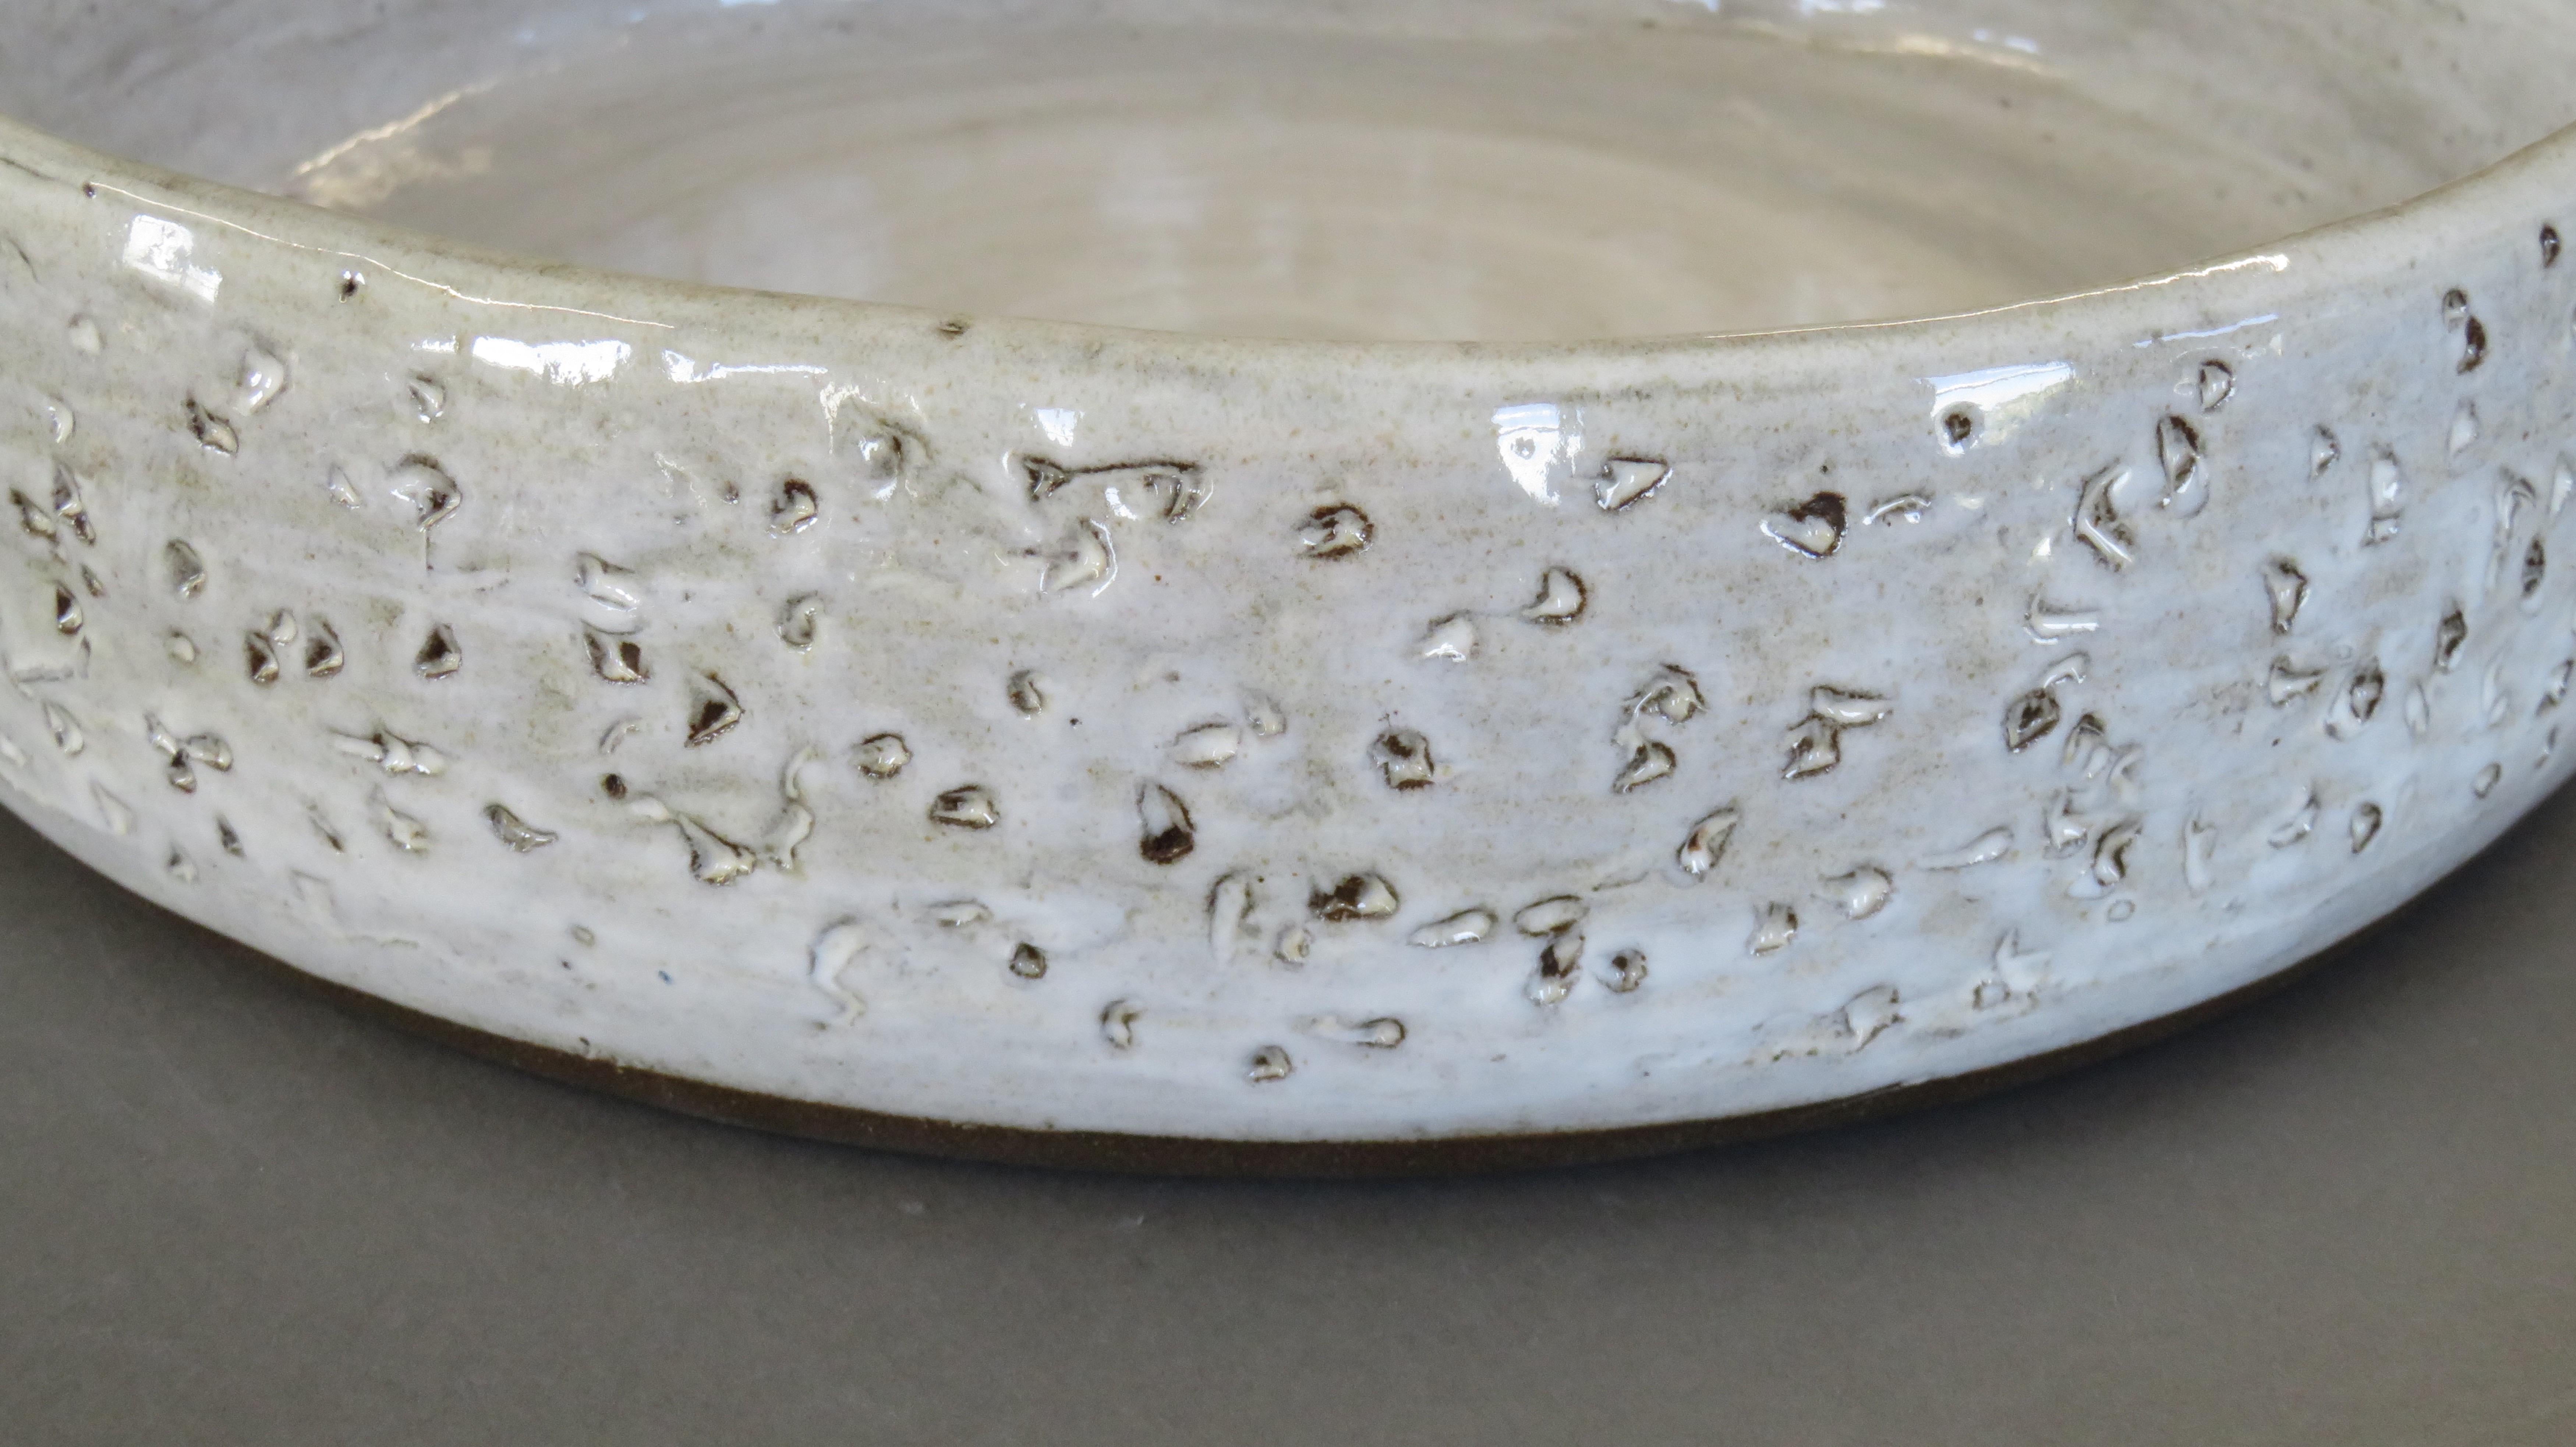 Organic Modern Large Low Serving Bowl, Carved Exterior with White Glaze, Hand Built Ceramic